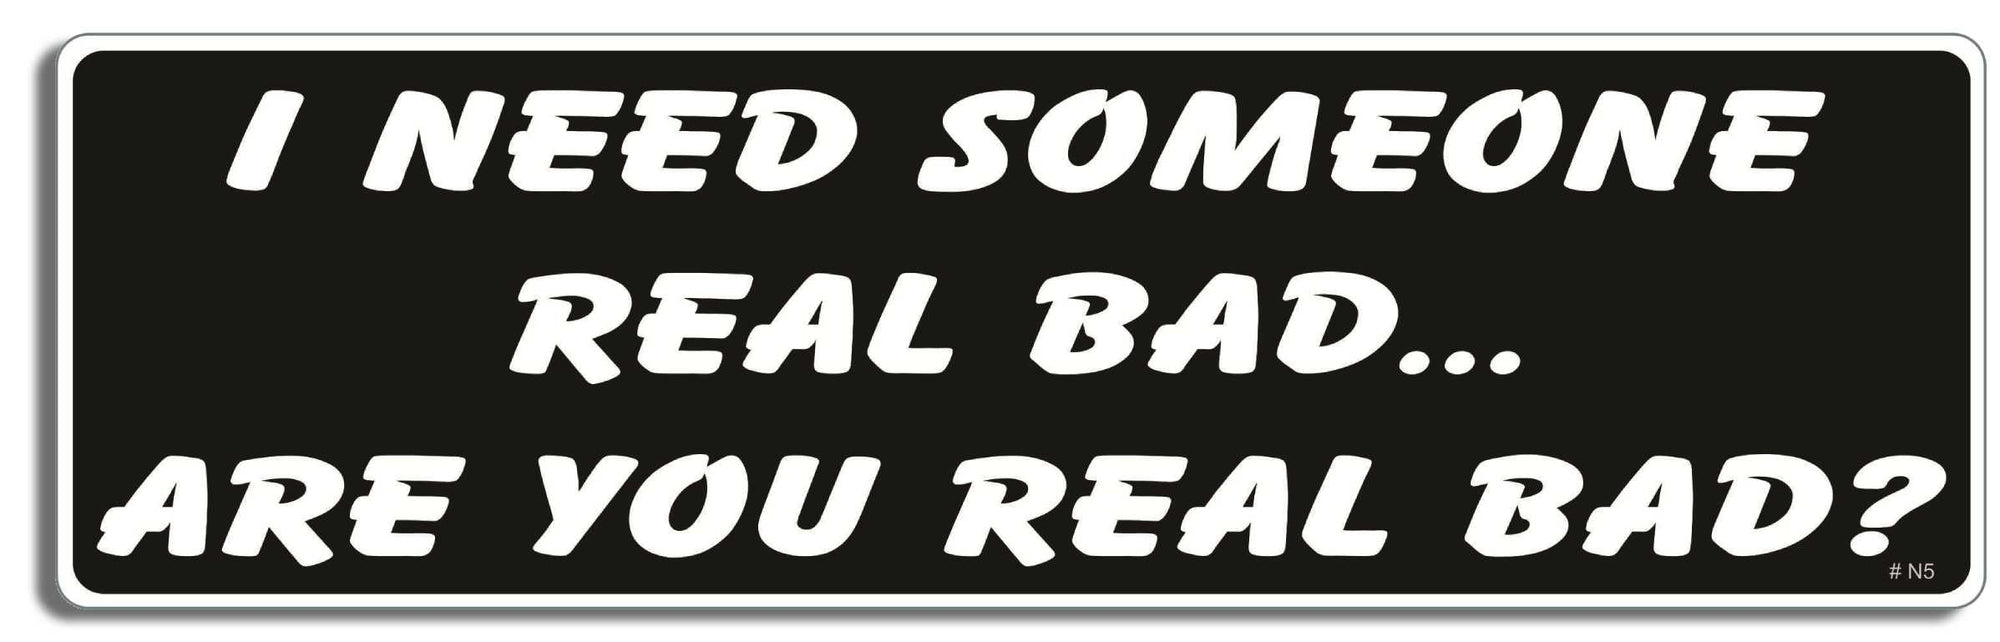 I need someone real bad. Are you real bad? - 3" x 10" Bumper Sticker--Car Magnet- -  Decal Bumper Sticker-dirty Bumper Sticker Car Magnet I need someone real bad. Are you-  Decal for carsadult, funny, funny quote, funny saying, naughty